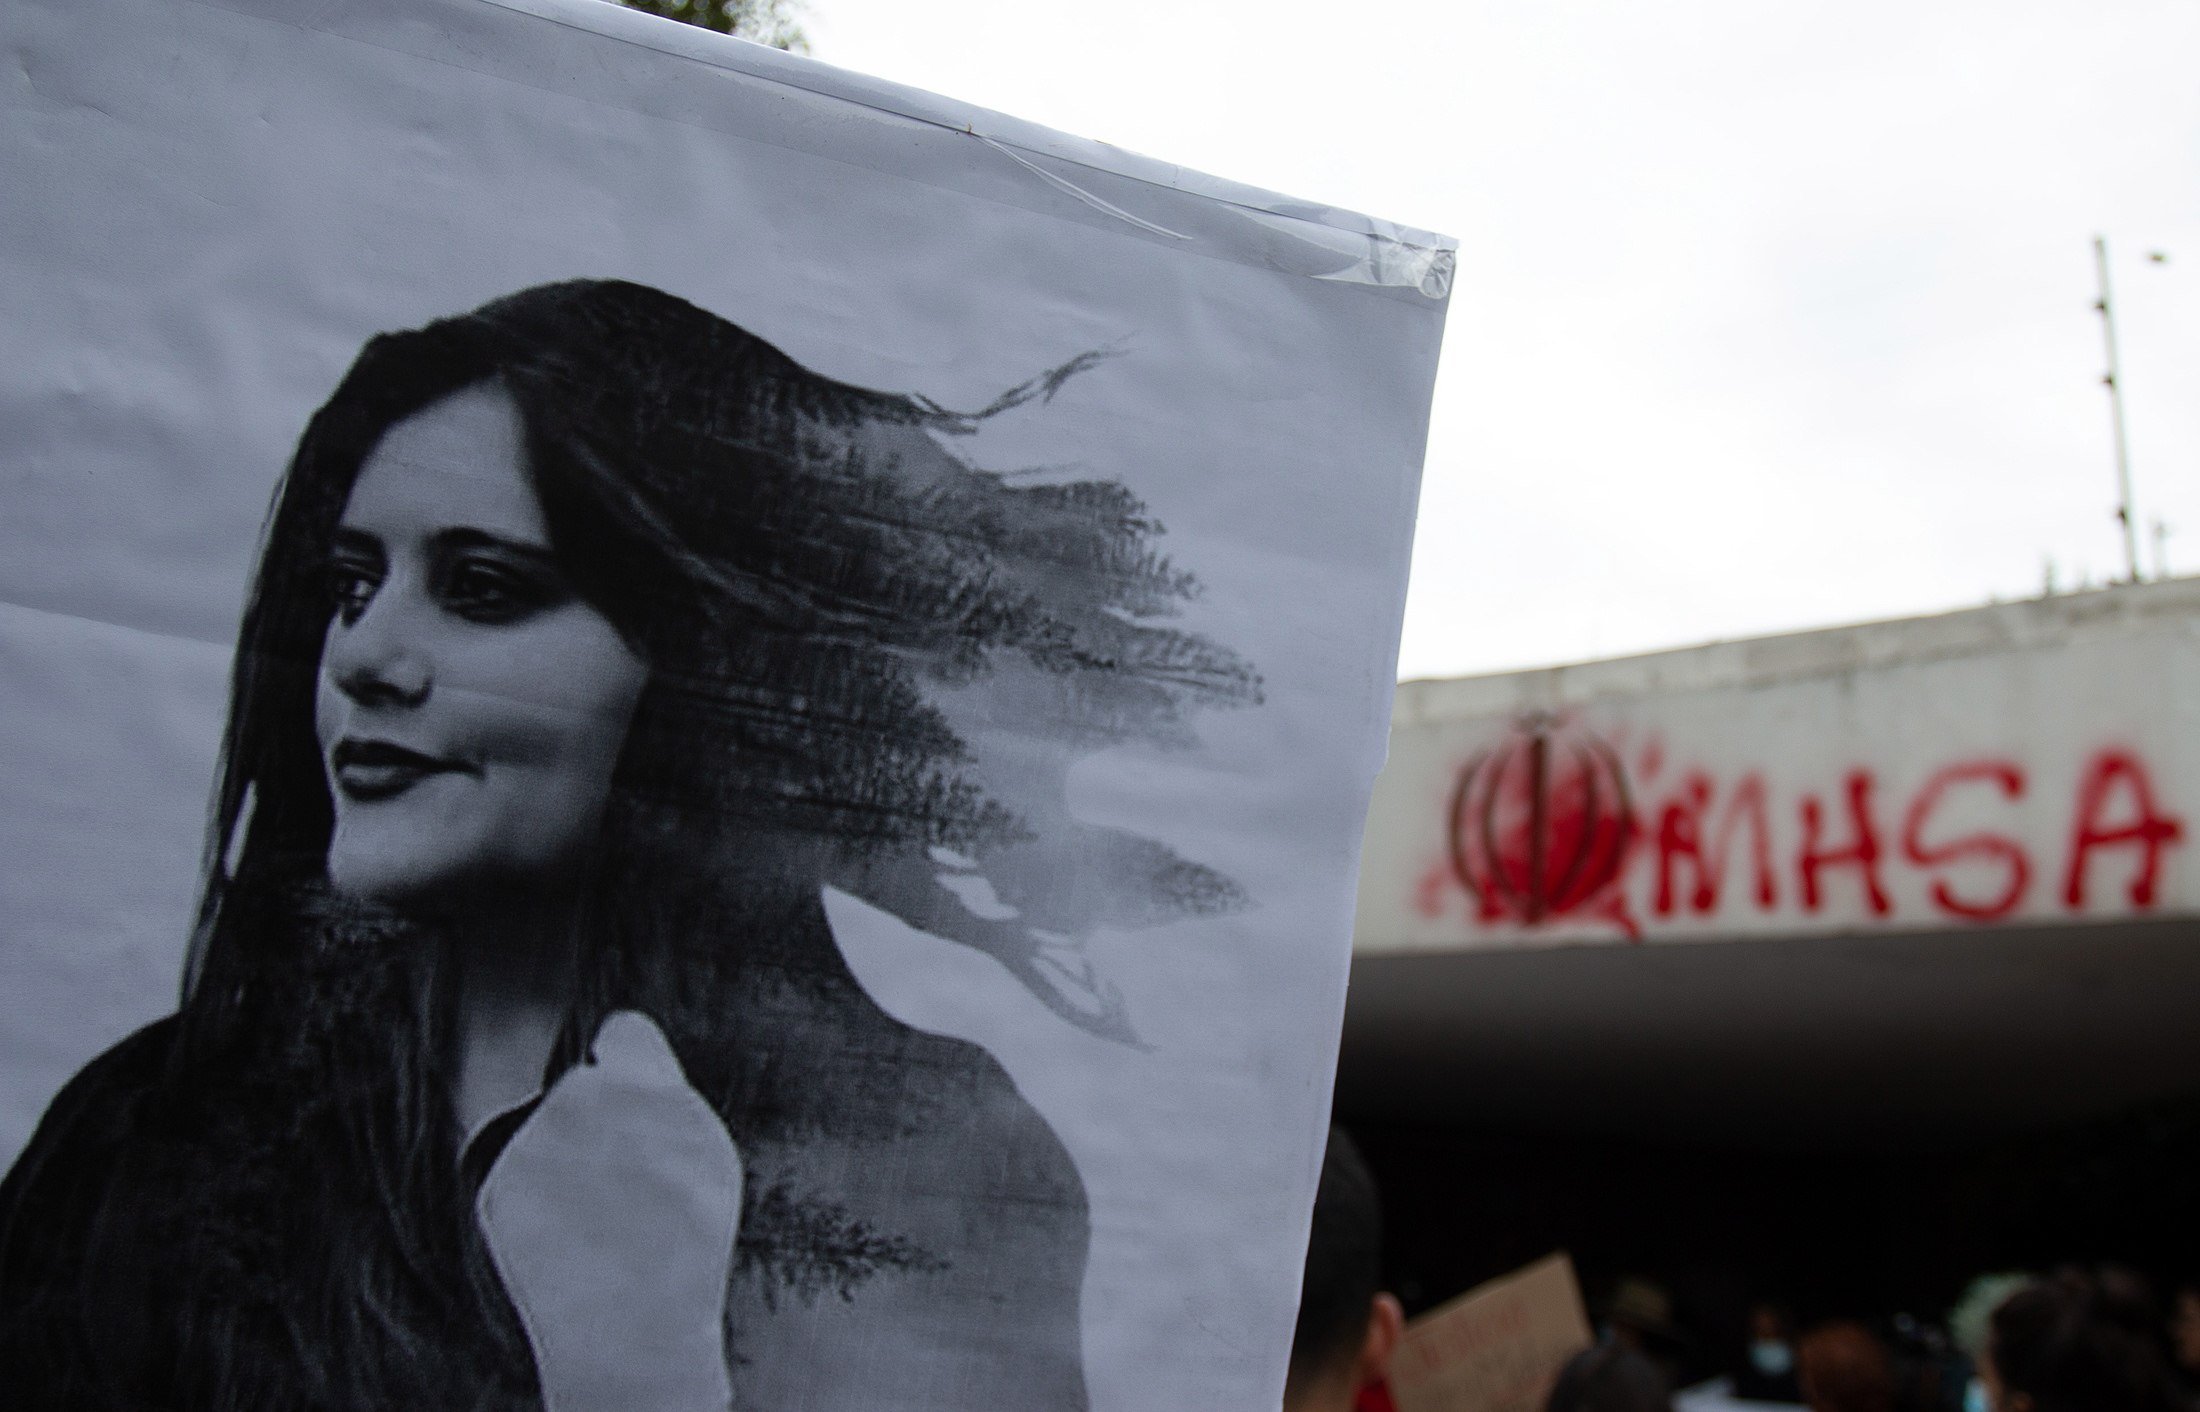 A demonstrator holds a poster during a protest demanding justice for Mahsa Amini, a 22-year-old Iranian woman who died while in the custody of Iran’s Guidance Patrol, in front of the Iranian embassy in Mexico City, Mexico, on September 27.  Photo: EPA-EFE